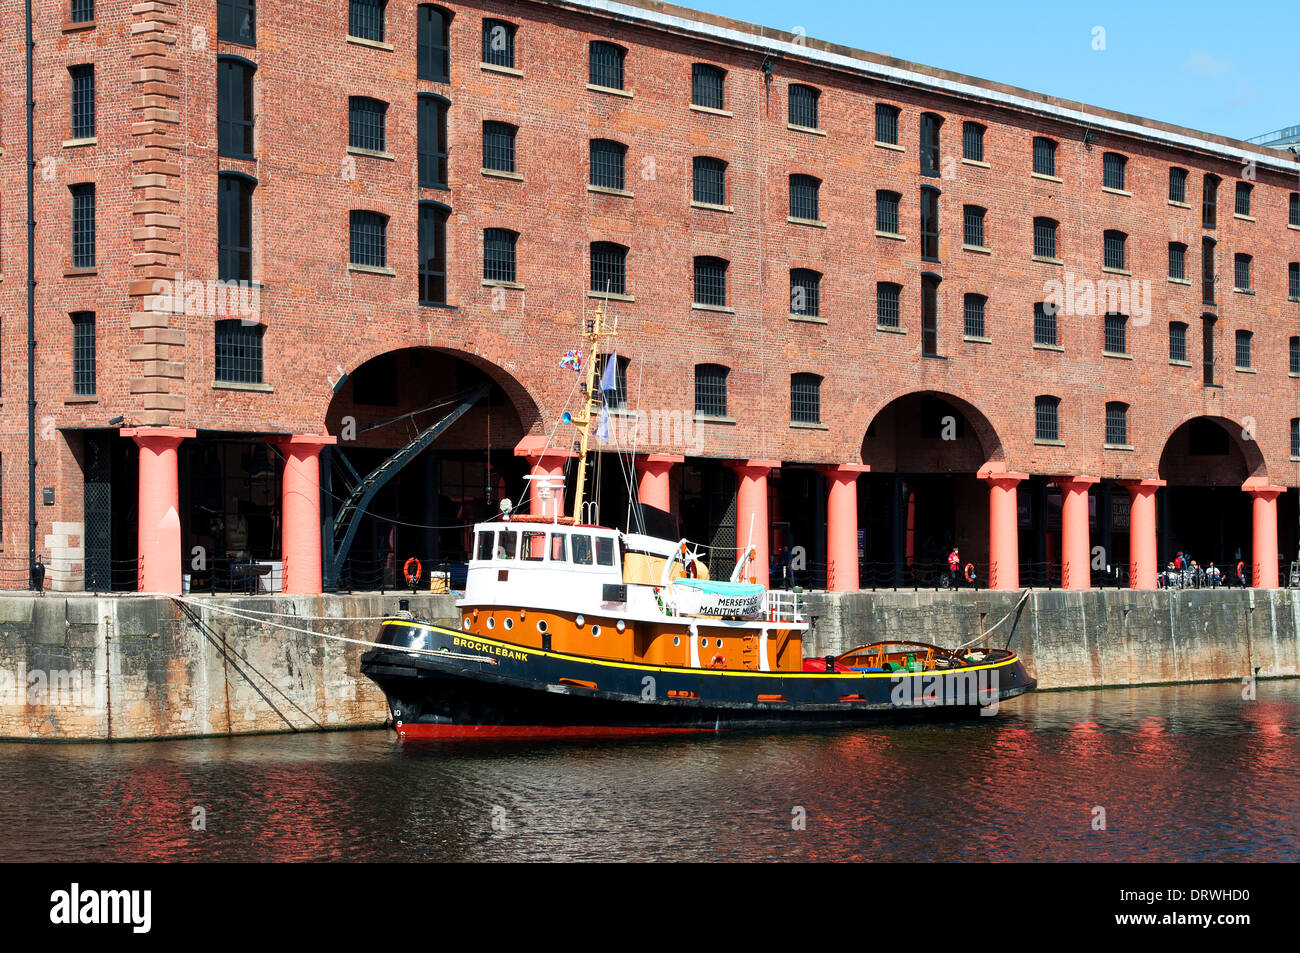 A pilot boat moored in the inner dock at the restored Albert Docks in Liverpool, Uk Stock Photo